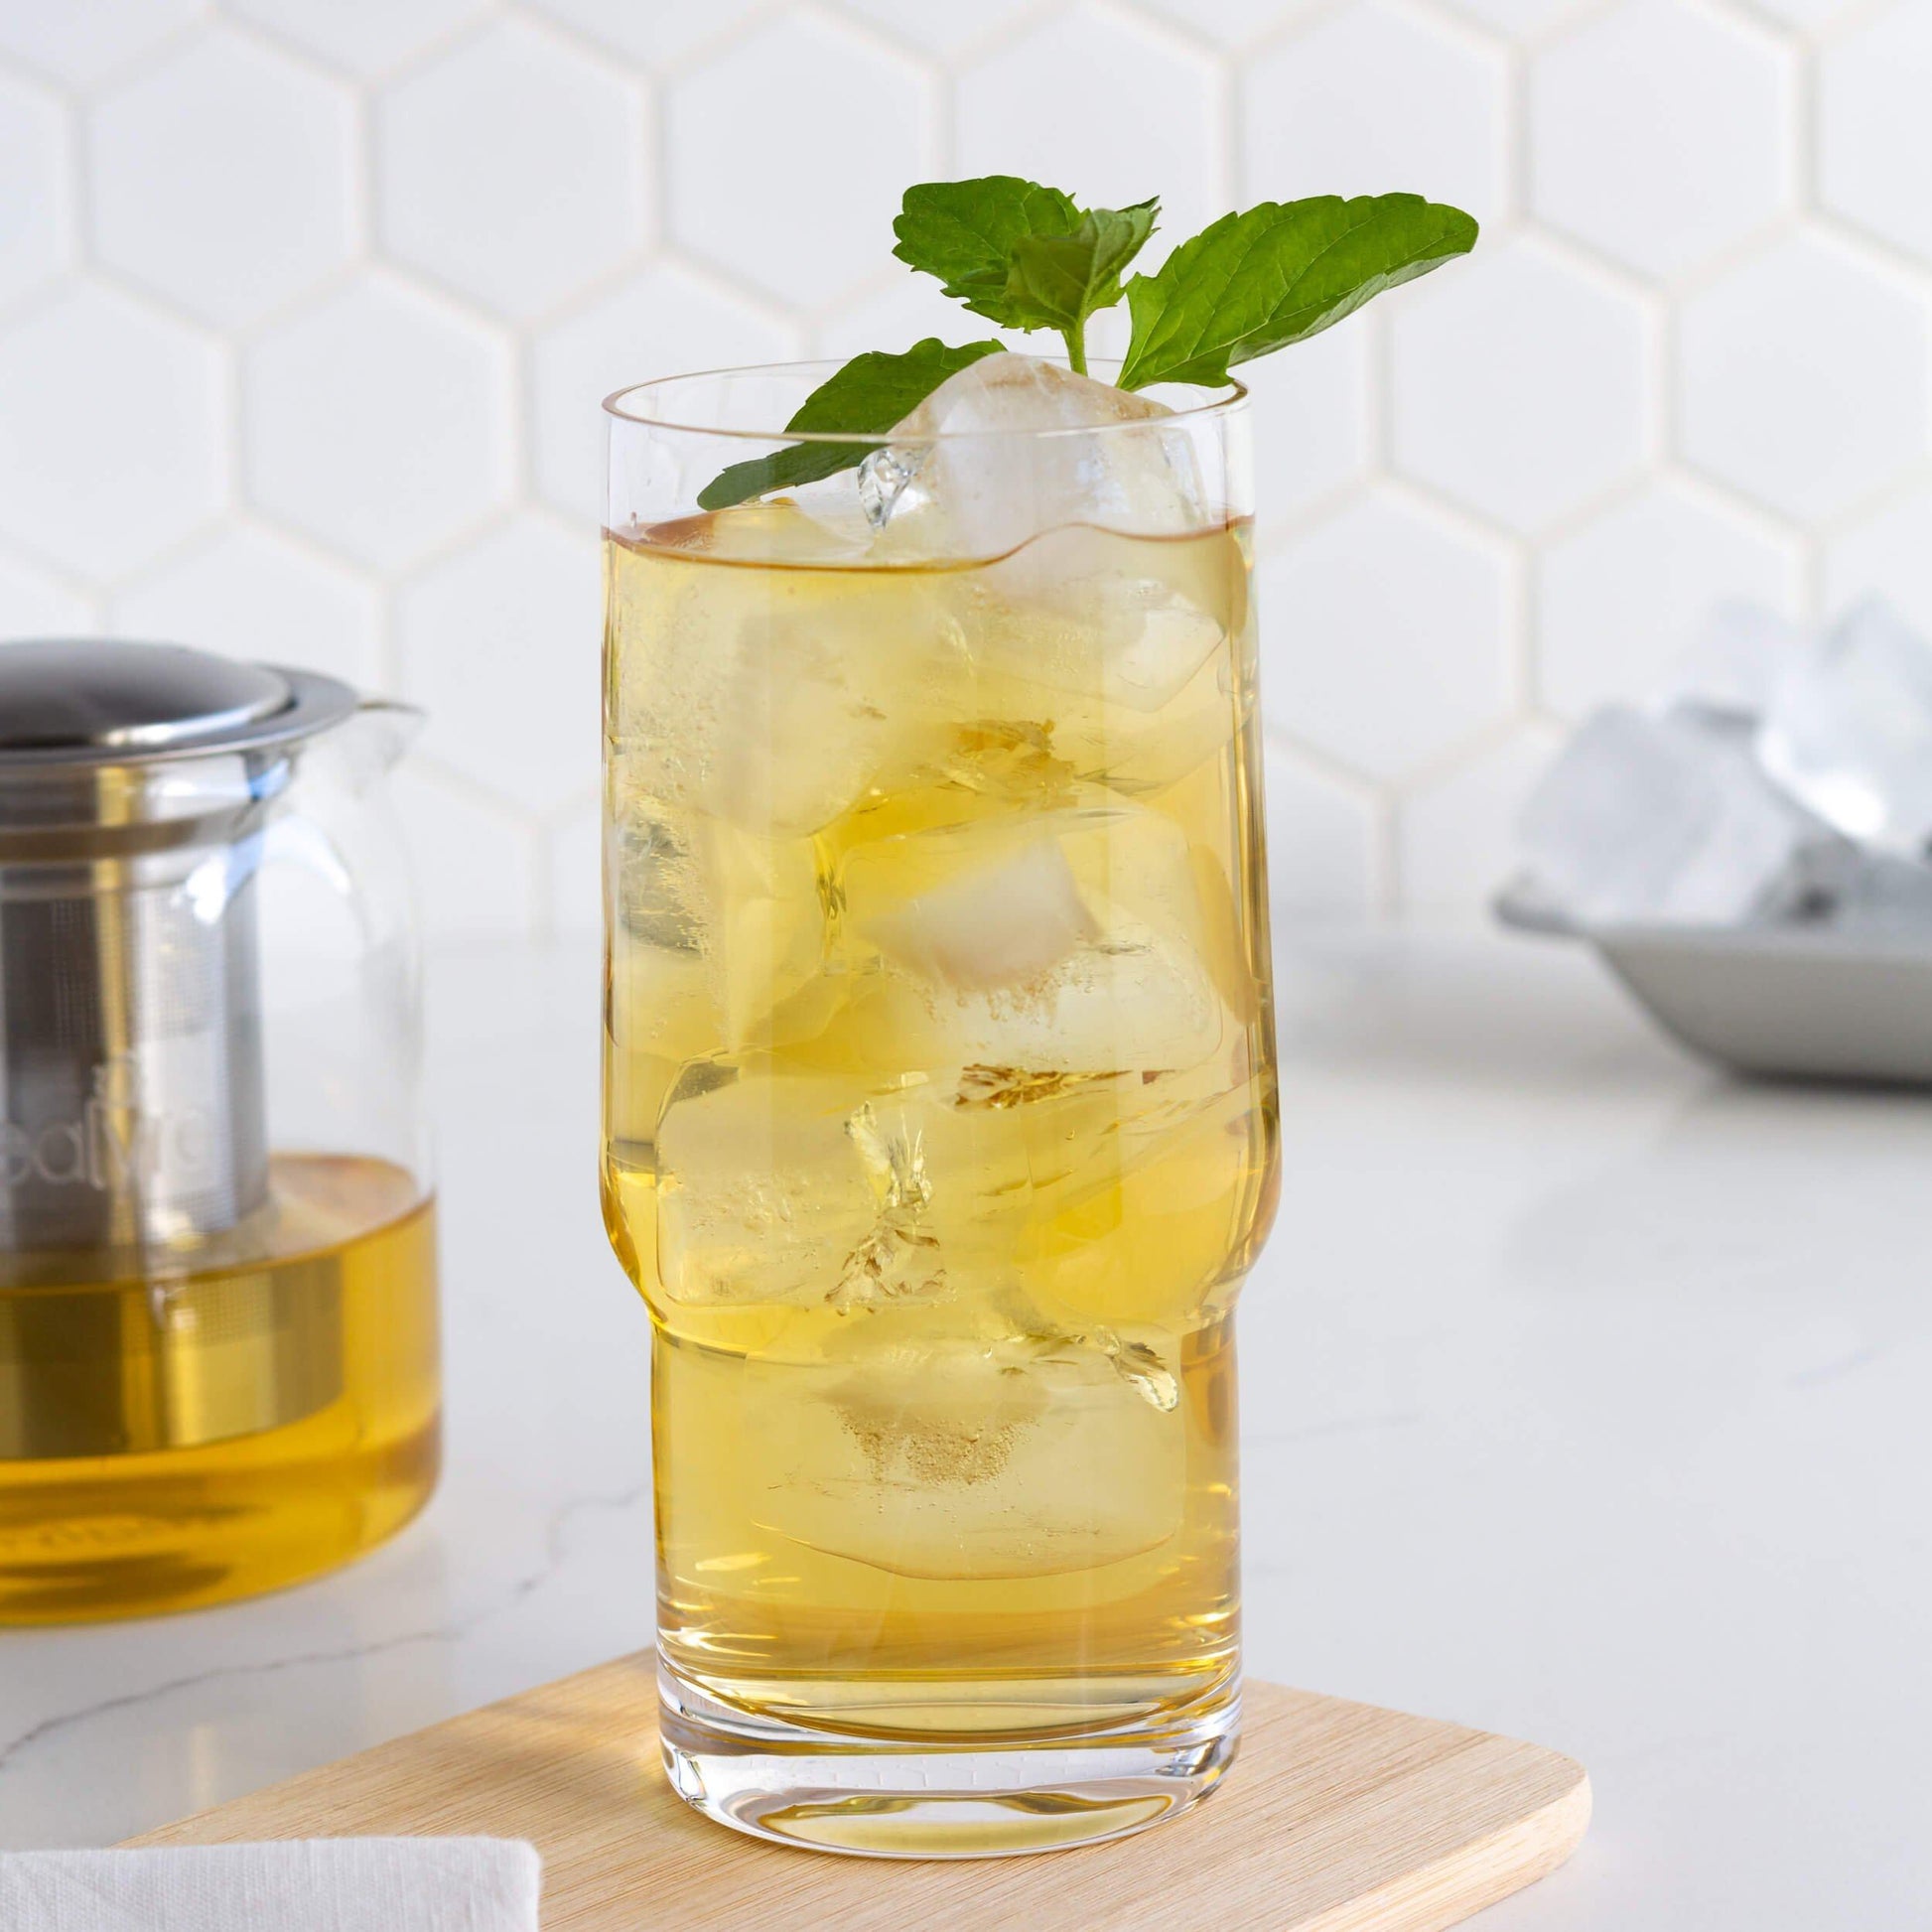 Moroccan Mint Green Tea shown iced in a glass with mint sprig